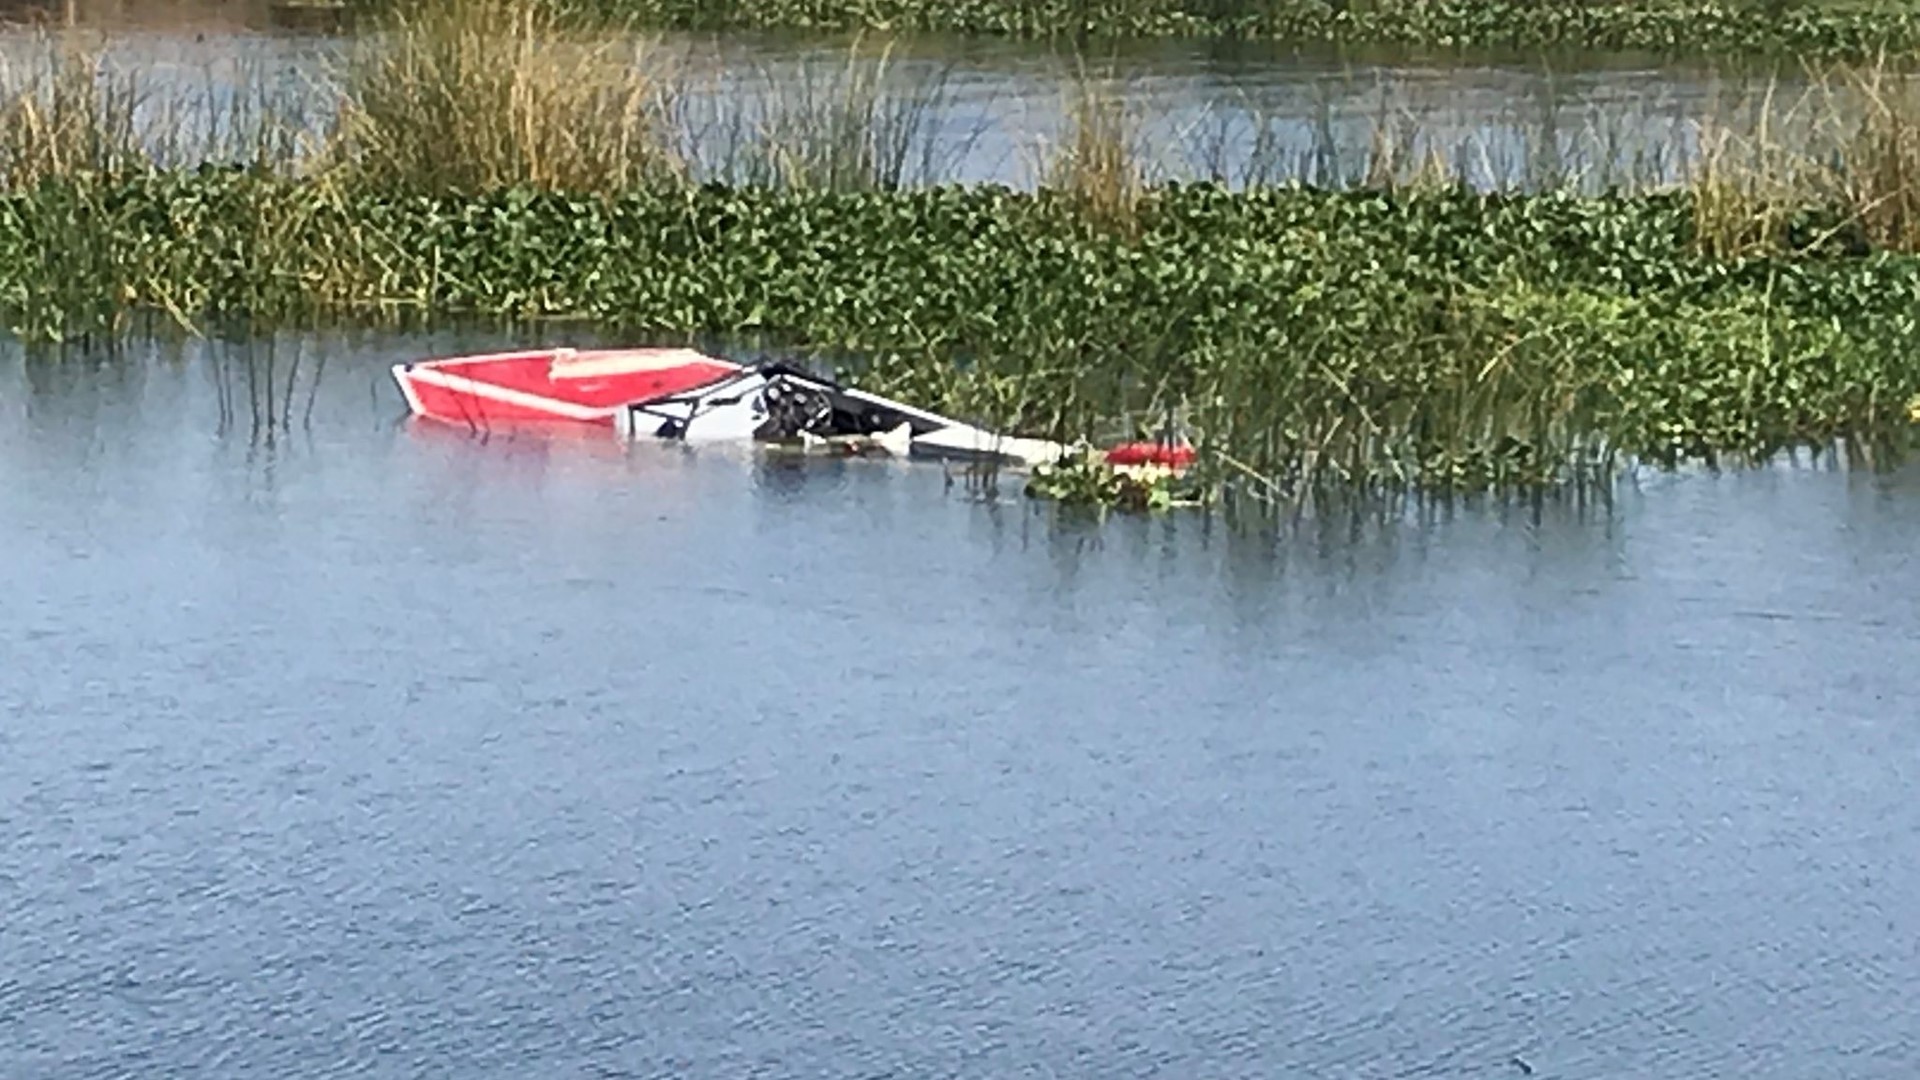 Investigators are still working to figure out what led up to a boat crash on the San Joaquin Delta just after 7 p.m. on Saturday. The crash killed a 24-year-old woman and left at least five others injured.